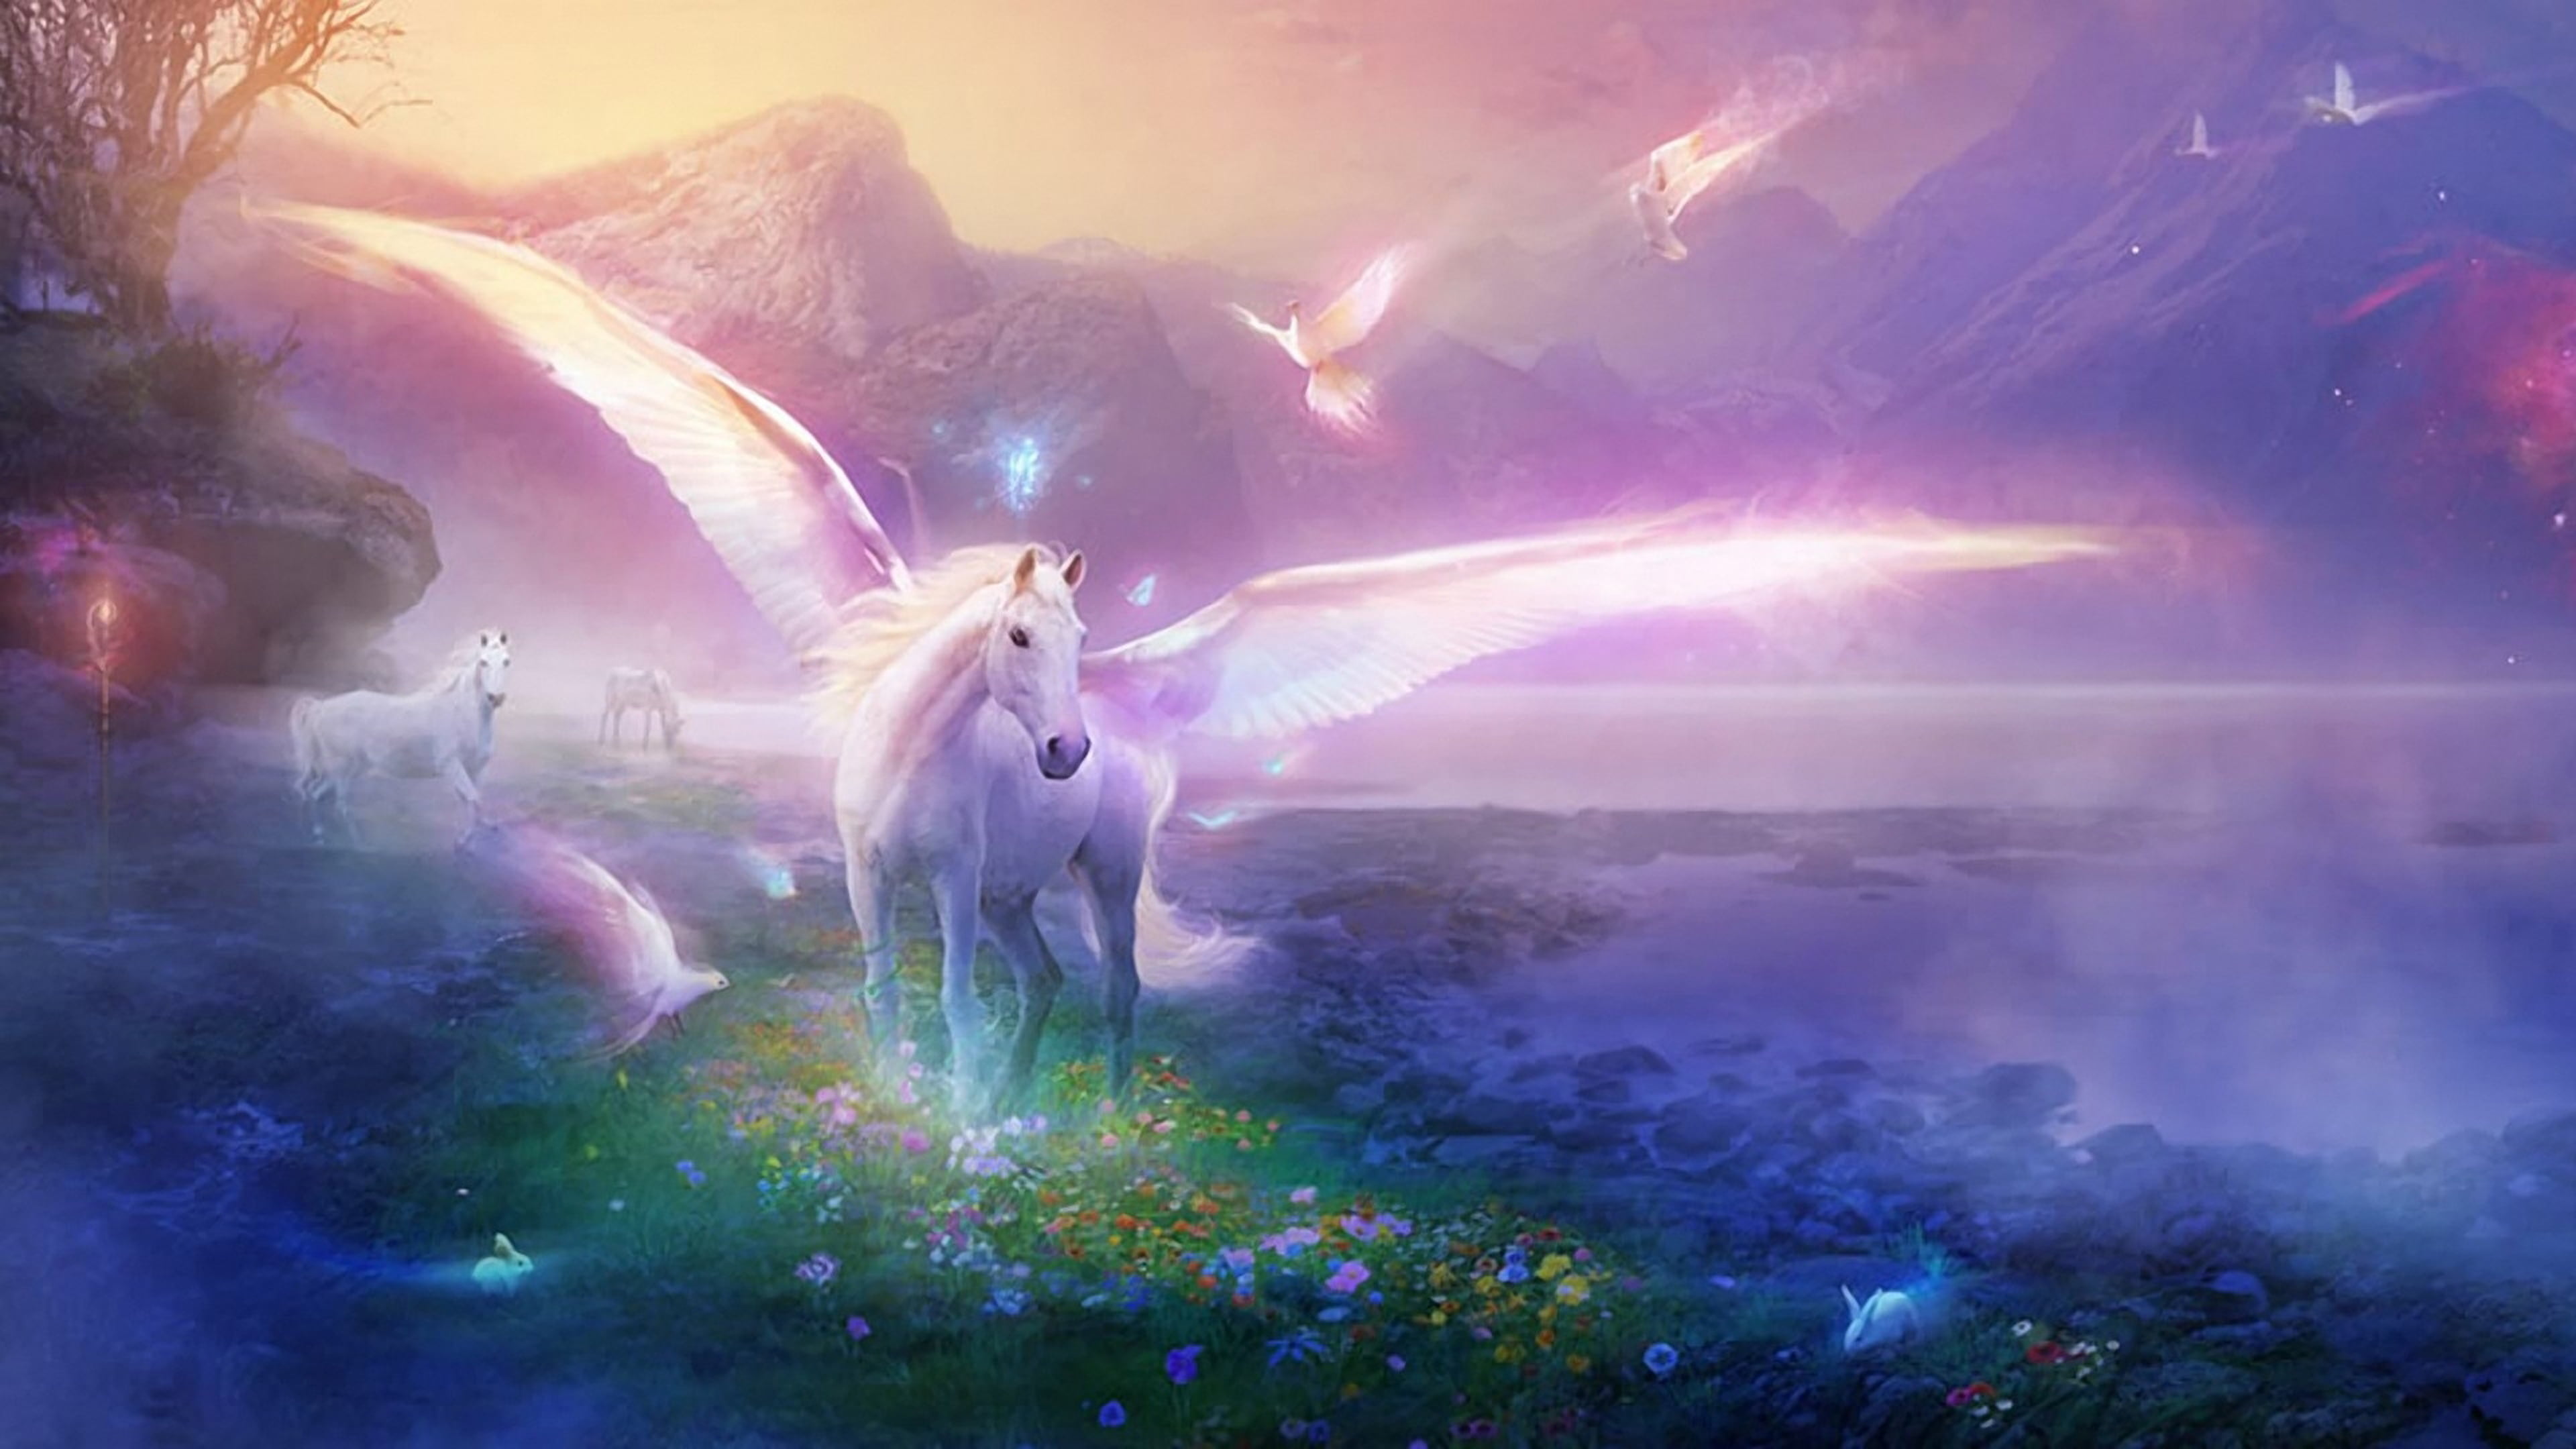 White Winged Unicorn With Open And White Pigeons In The World Of Fairy Tales And Fantasy Hd Wallpaper Widescreen 3840×2160